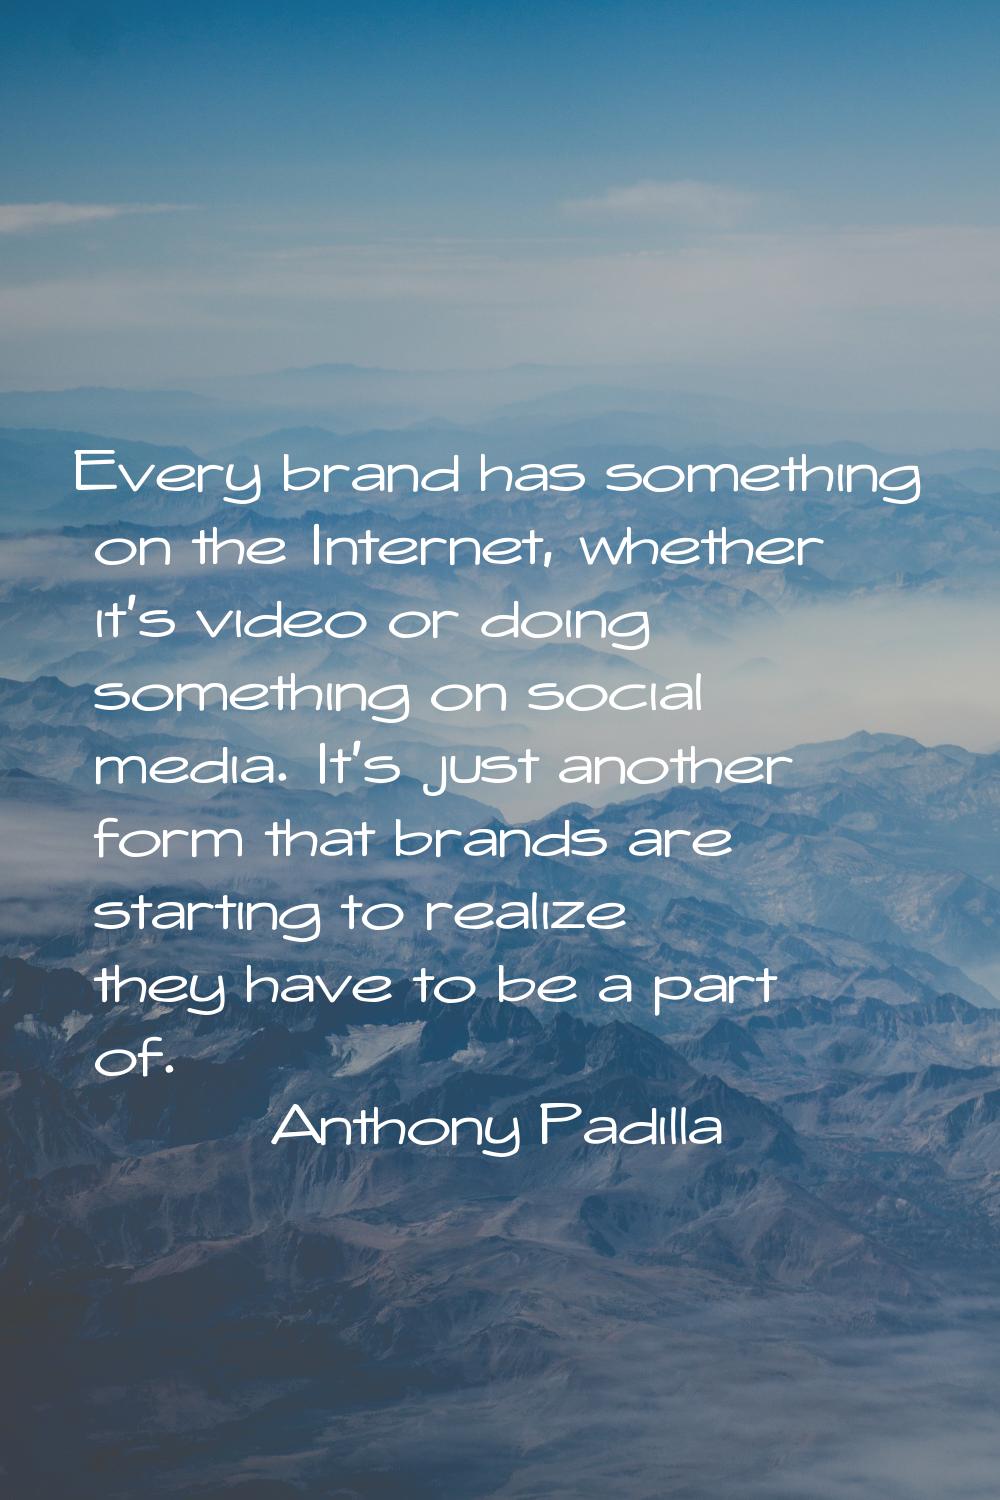 Every brand has something on the Internet, whether it's video or doing something on social media. I